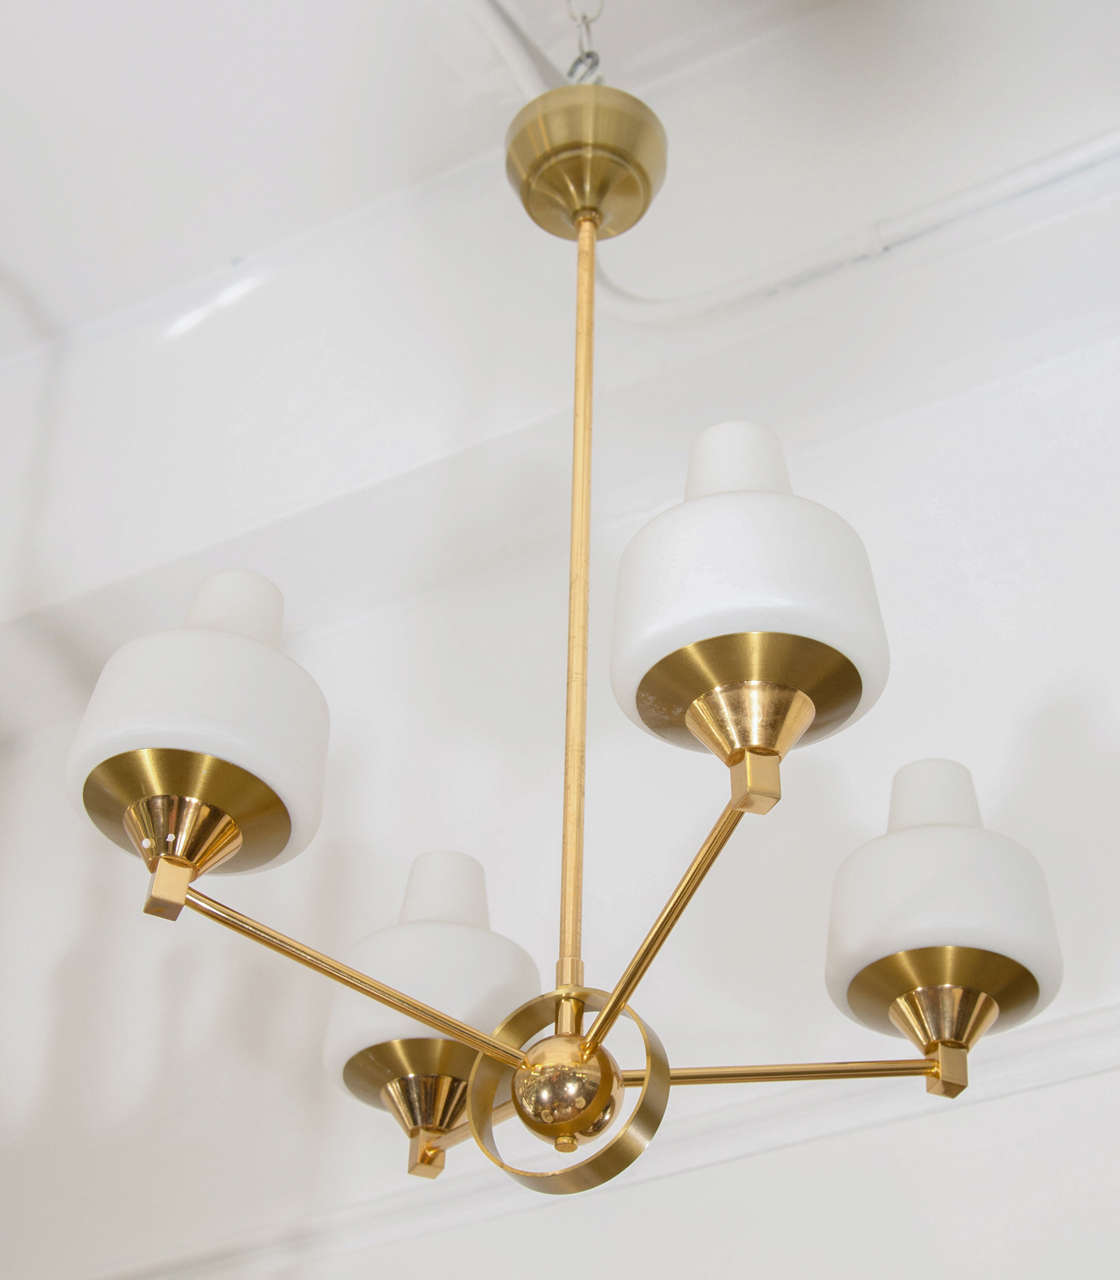 Midcentury Brass and Frosted Glass, Four-Arm Pendant Light In Good Condition For Sale In New York, NY